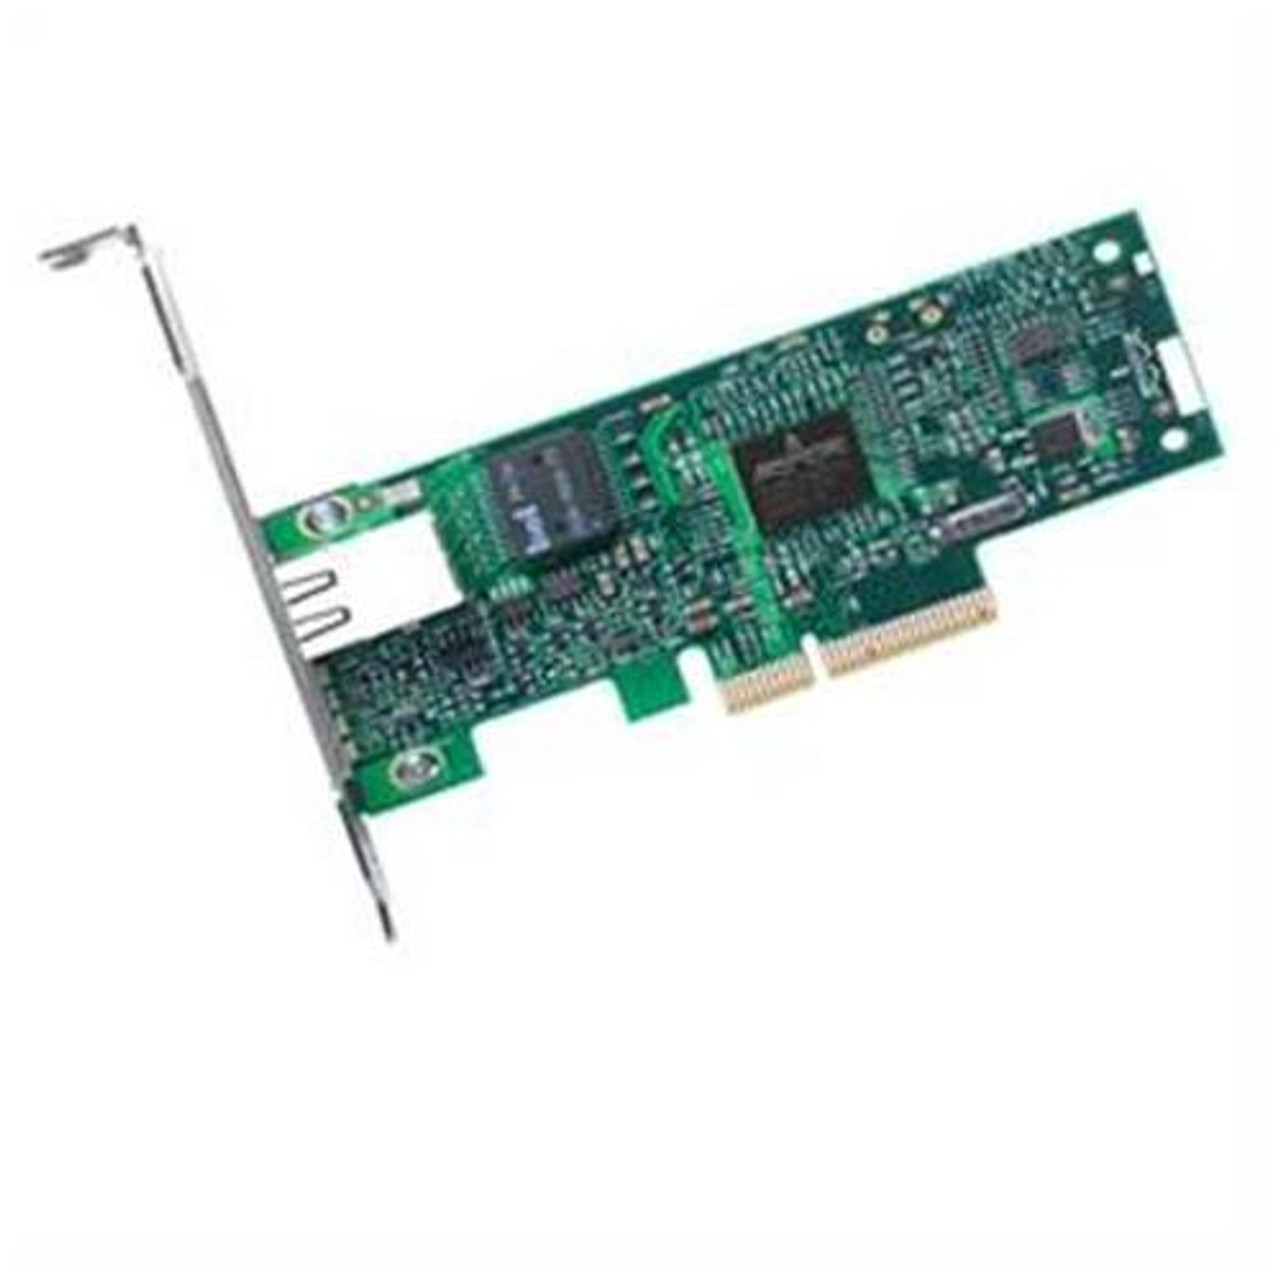 9213P - Dell Dual Port 10/100 Ethernet Network Interface Card